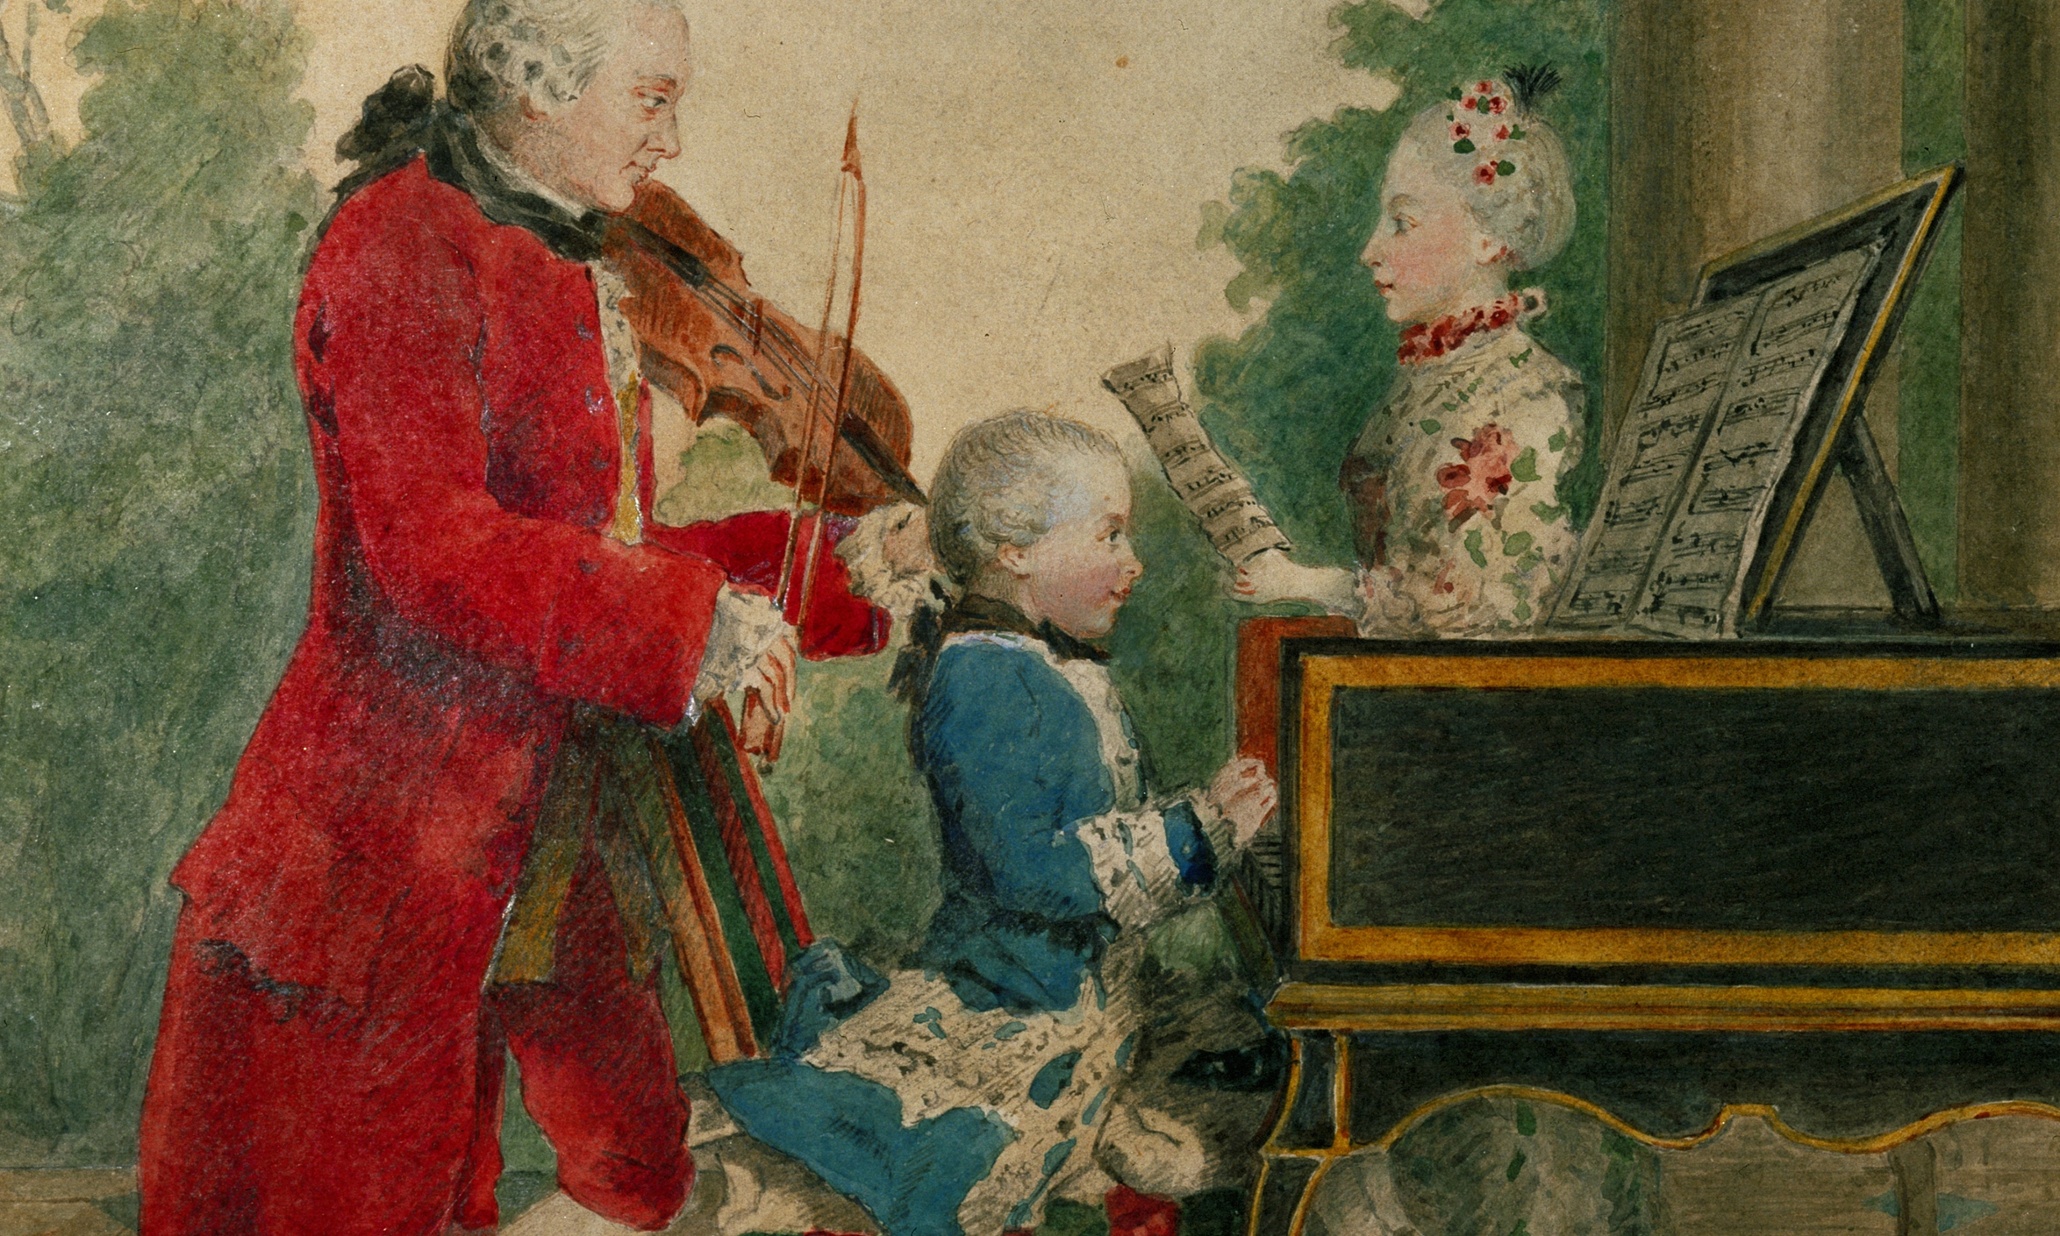 AUSTRIA - JANUARY 01:  Leopold Mozart with Wolfgang Amadeus and Nannerl. Watercolour. 1763.  (Photo by Imagno/Getty Images) [Leopold Mozart beim Musizieren mit Wolfgang Amadeus and Nannerl. Aquarell. 1763.]